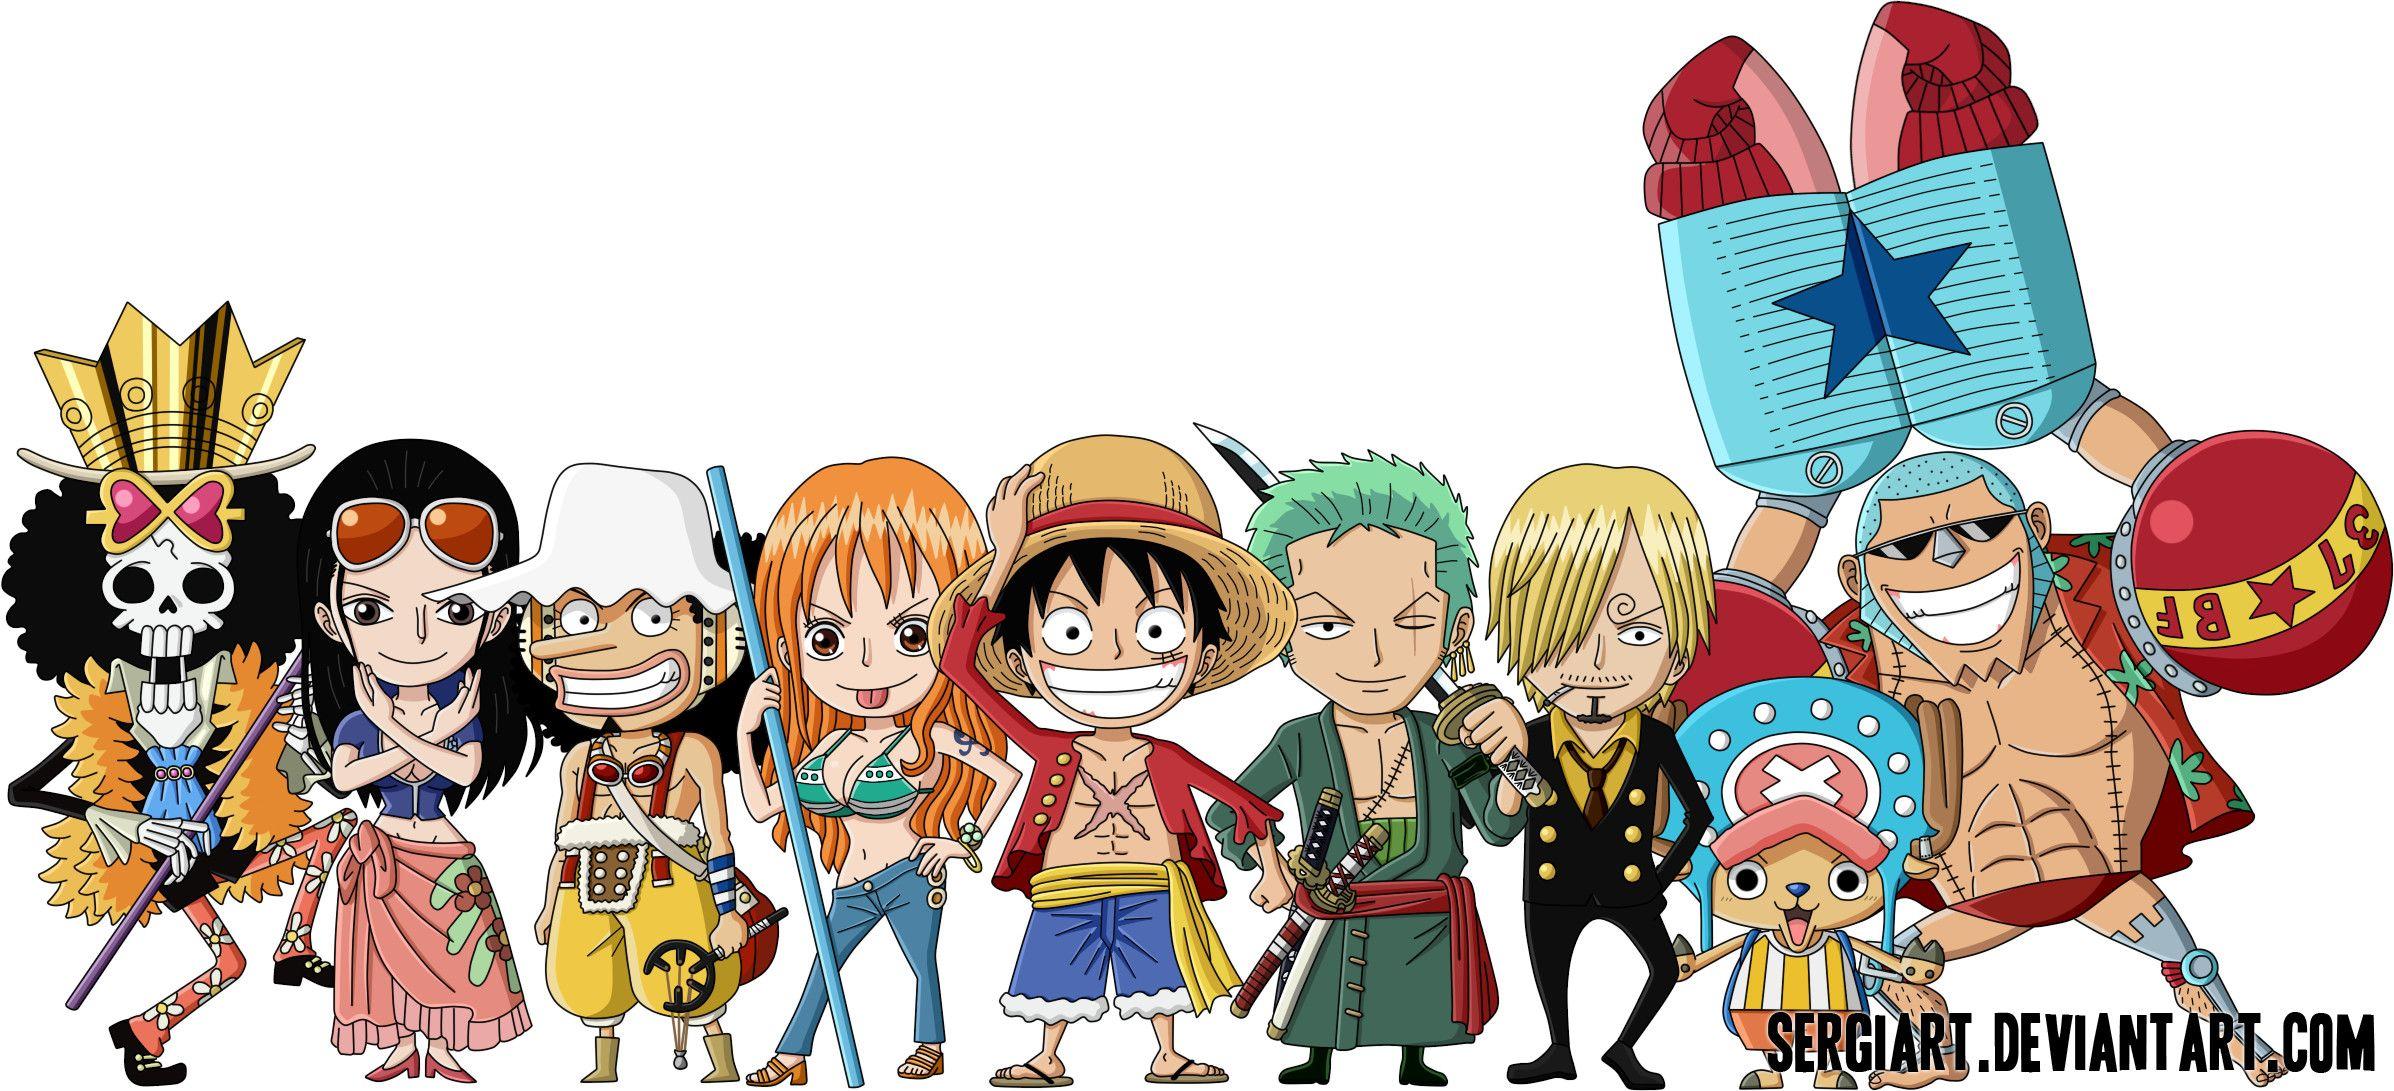 With high resolution and beautiful movement effects, you will have a unique experience when using your phone or computer. Download the One Piece Chibi Wallpaper 2024 today to conquer this colorful world.